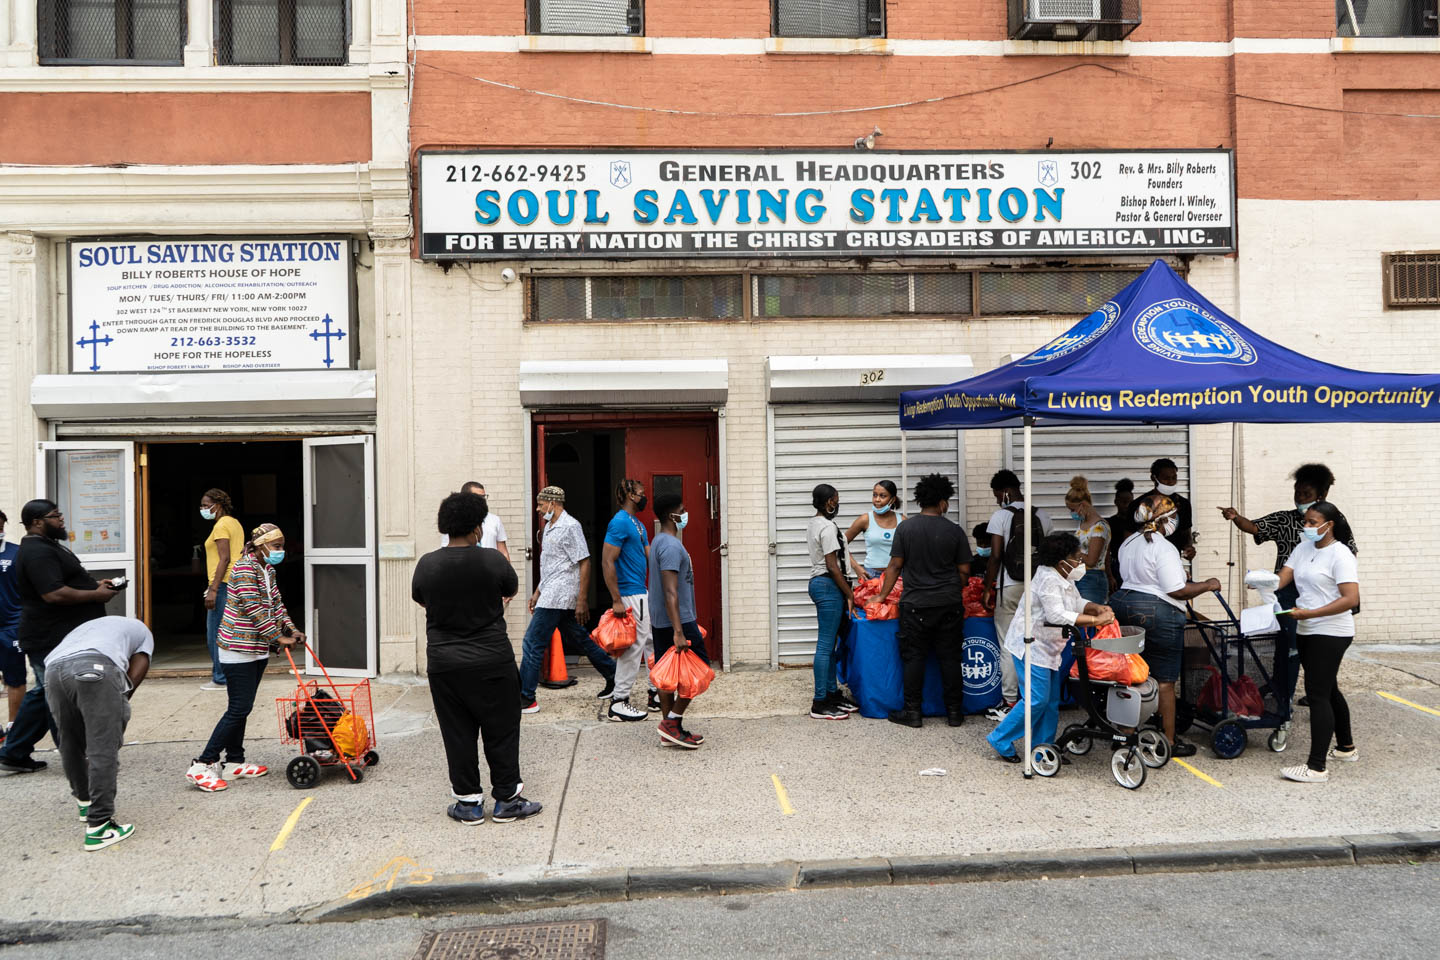 August 28, 2020: Soul Saving Station Headquarters. The organization gives away free food to people that come or sends volunteers with free food to people unable to come and pick it up. 302 West 124th Street, Harlem, New York, New York. © Camilo José Vergara